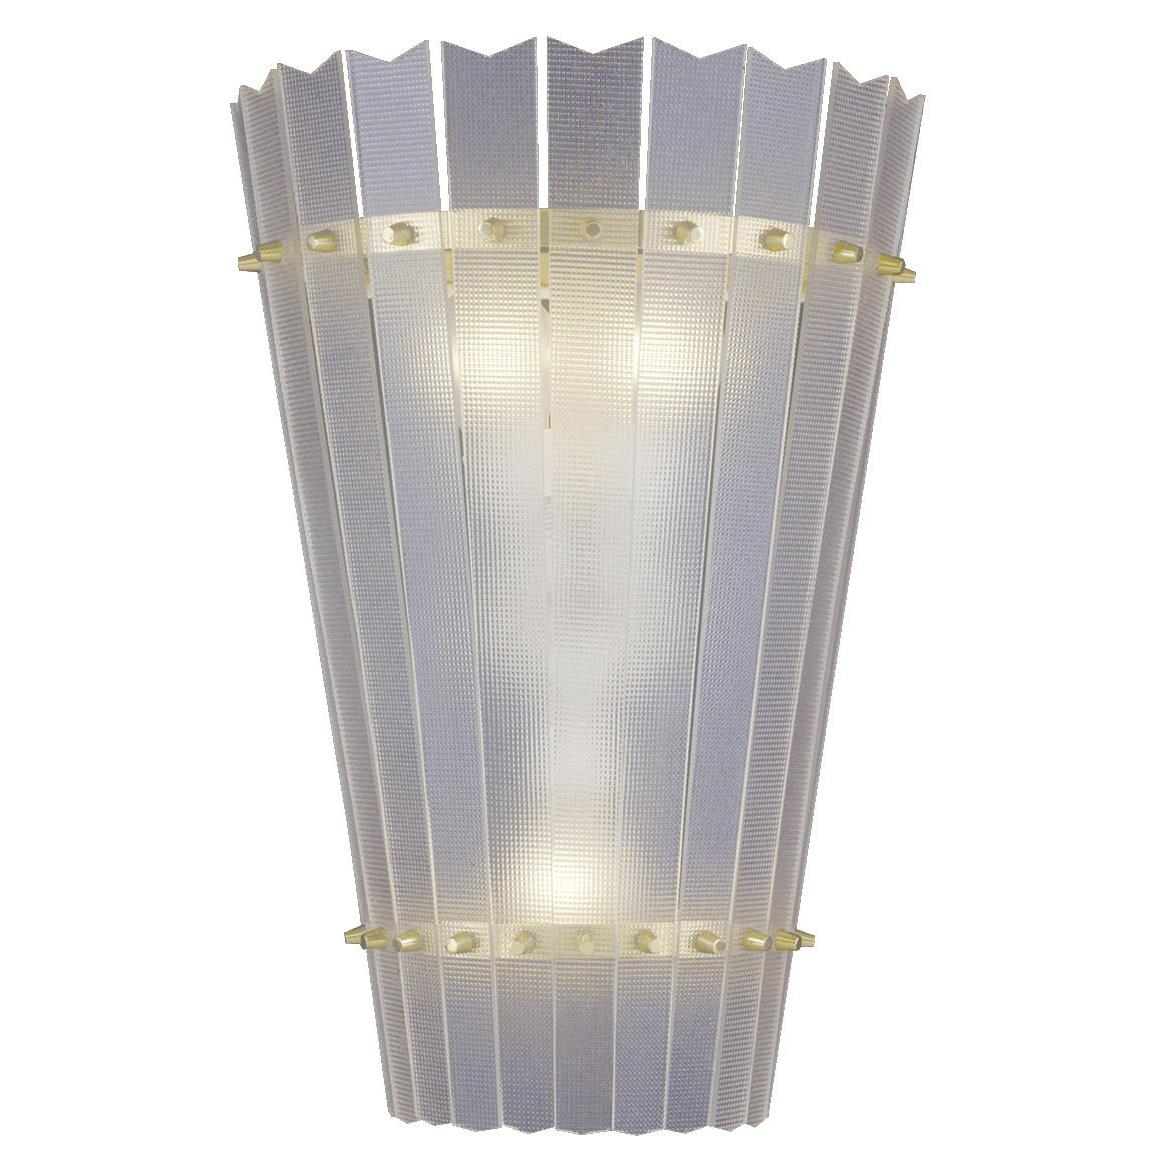 Mid-Century Modern Wall Light with Acrylic Shade "Aphrodite", Re Edition For Sale